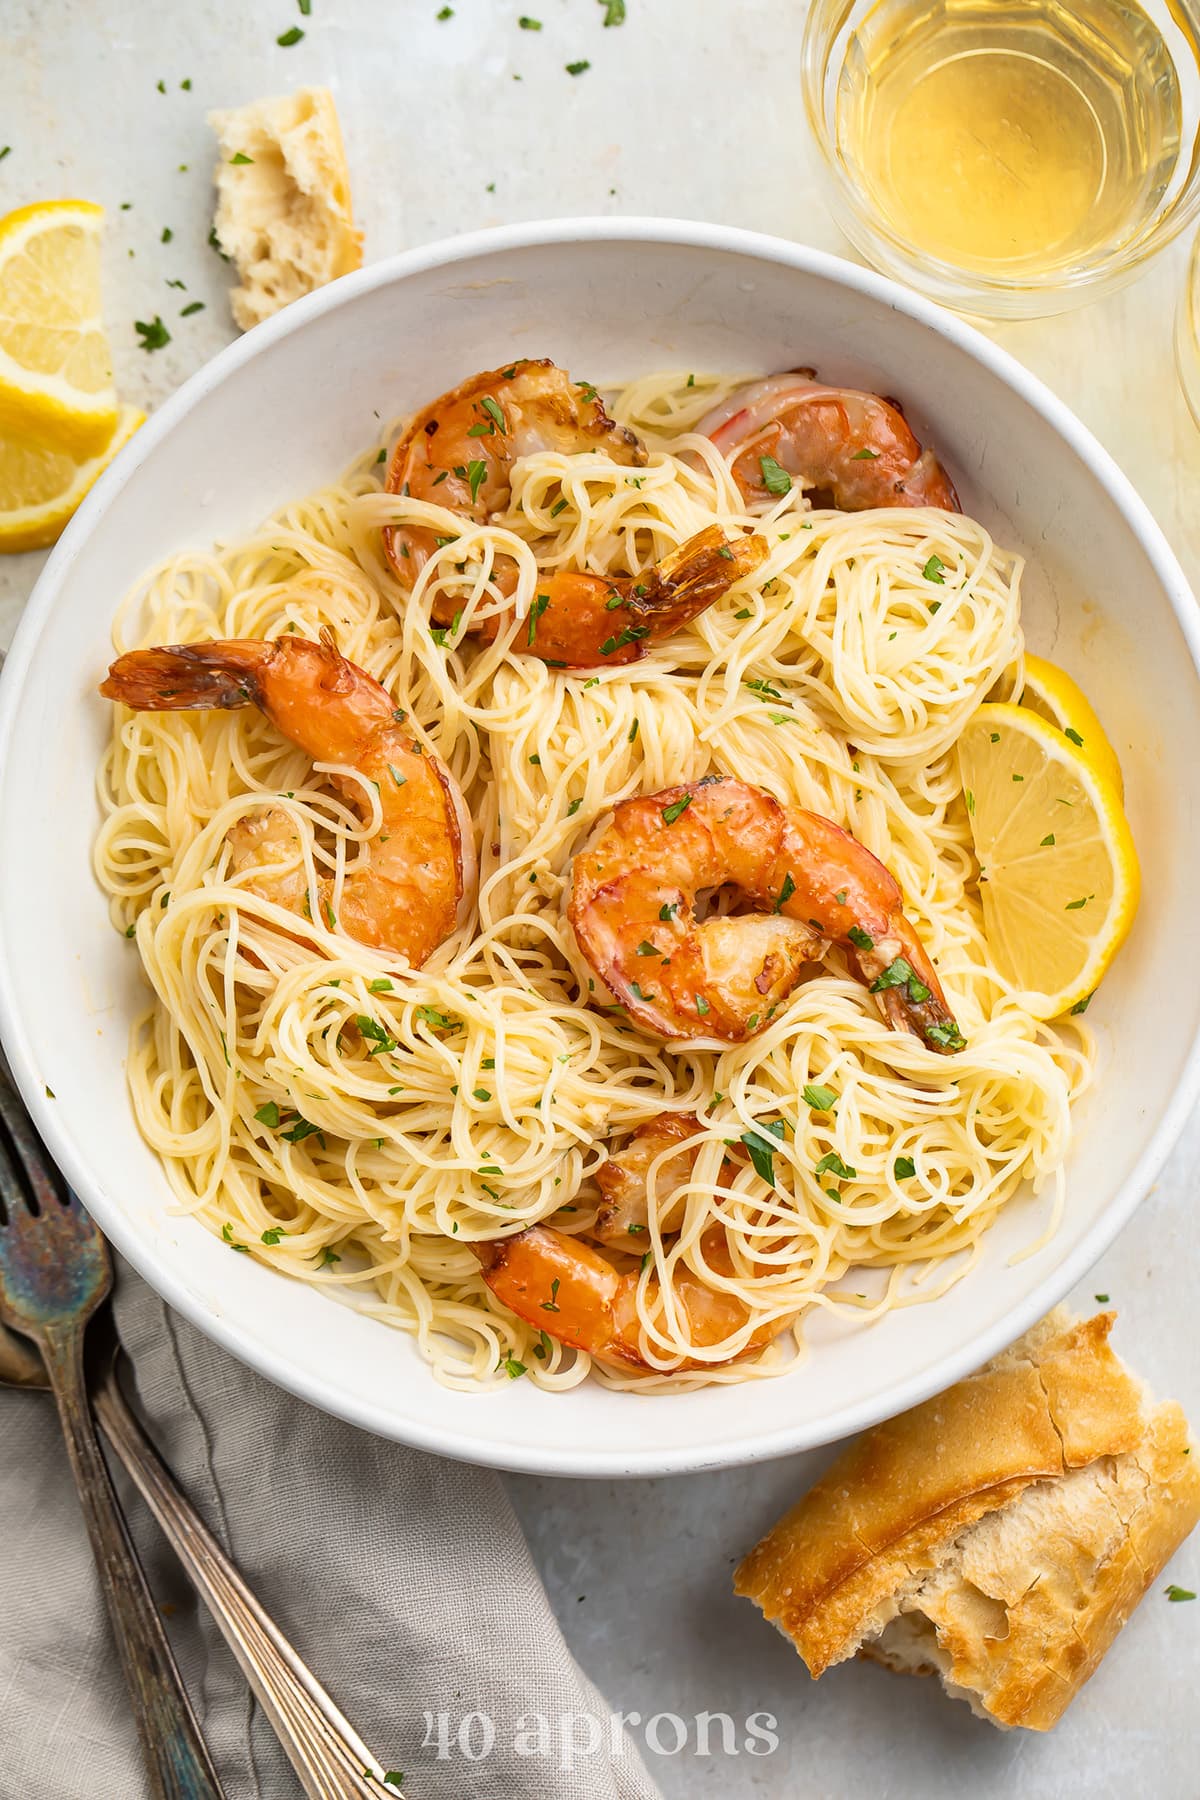 Sautéed garlic butter shrimp plated atop a bowl of angel hair pasta and garnished with parsley and lemon wedges.